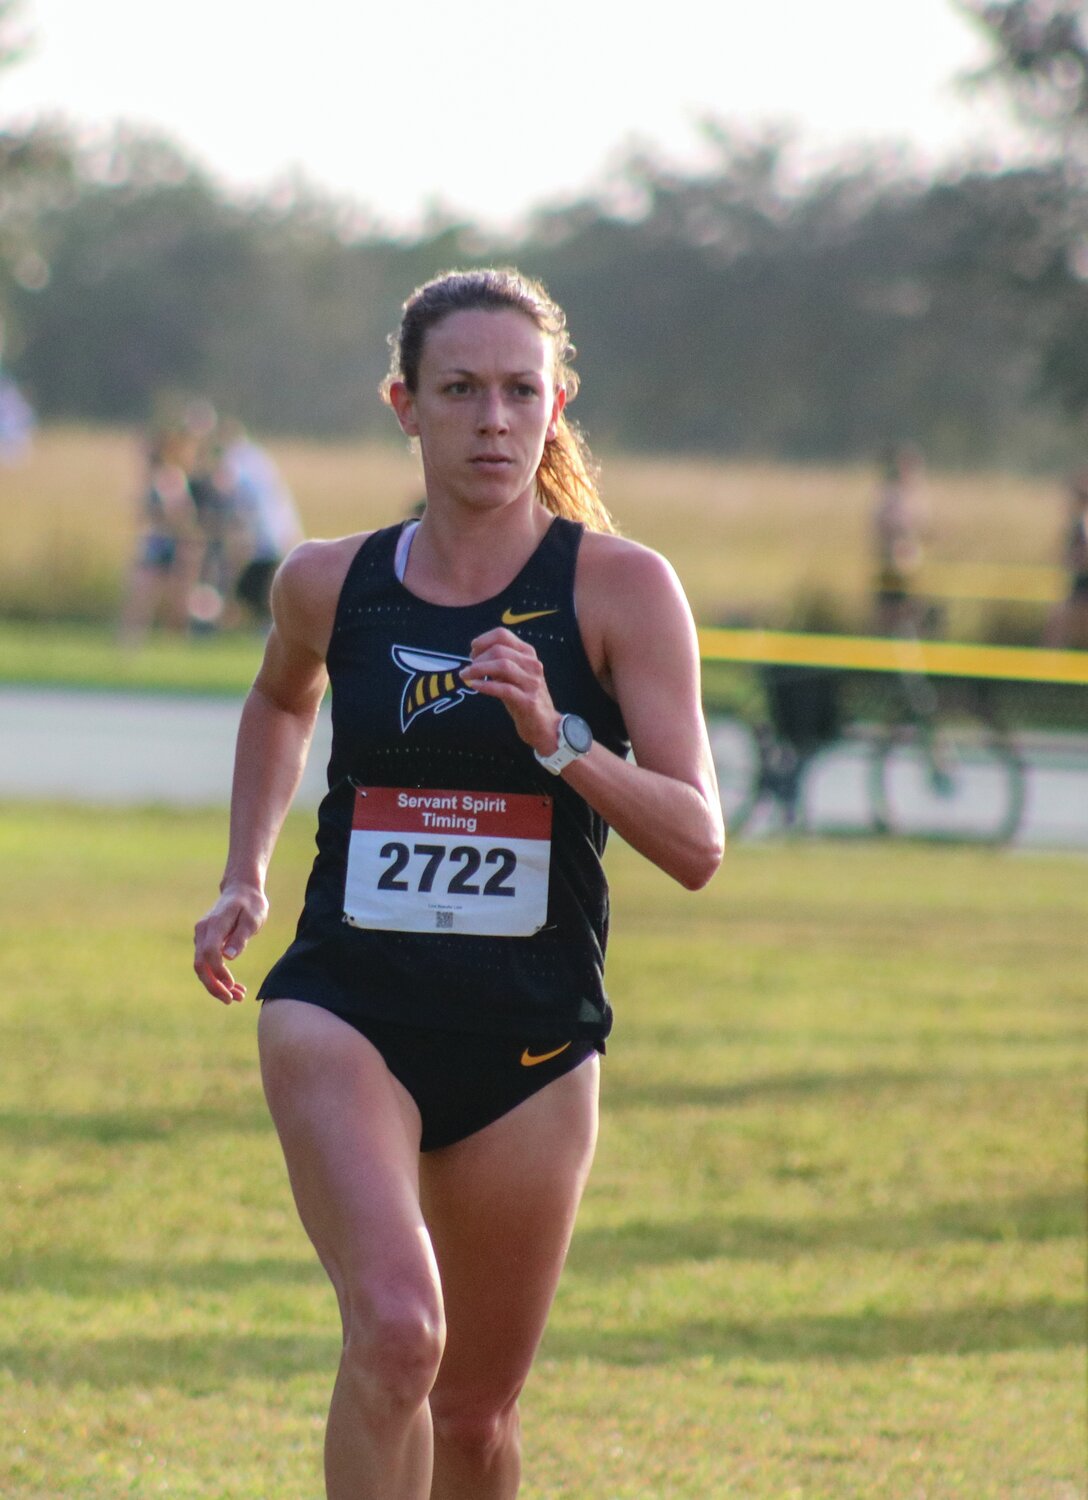 Alexandra Midgett powers in the lead for Savannah College of Arts and Design where she led a 1-2-3-4-5 finish at the Sun Conference championship race and was top finisher.